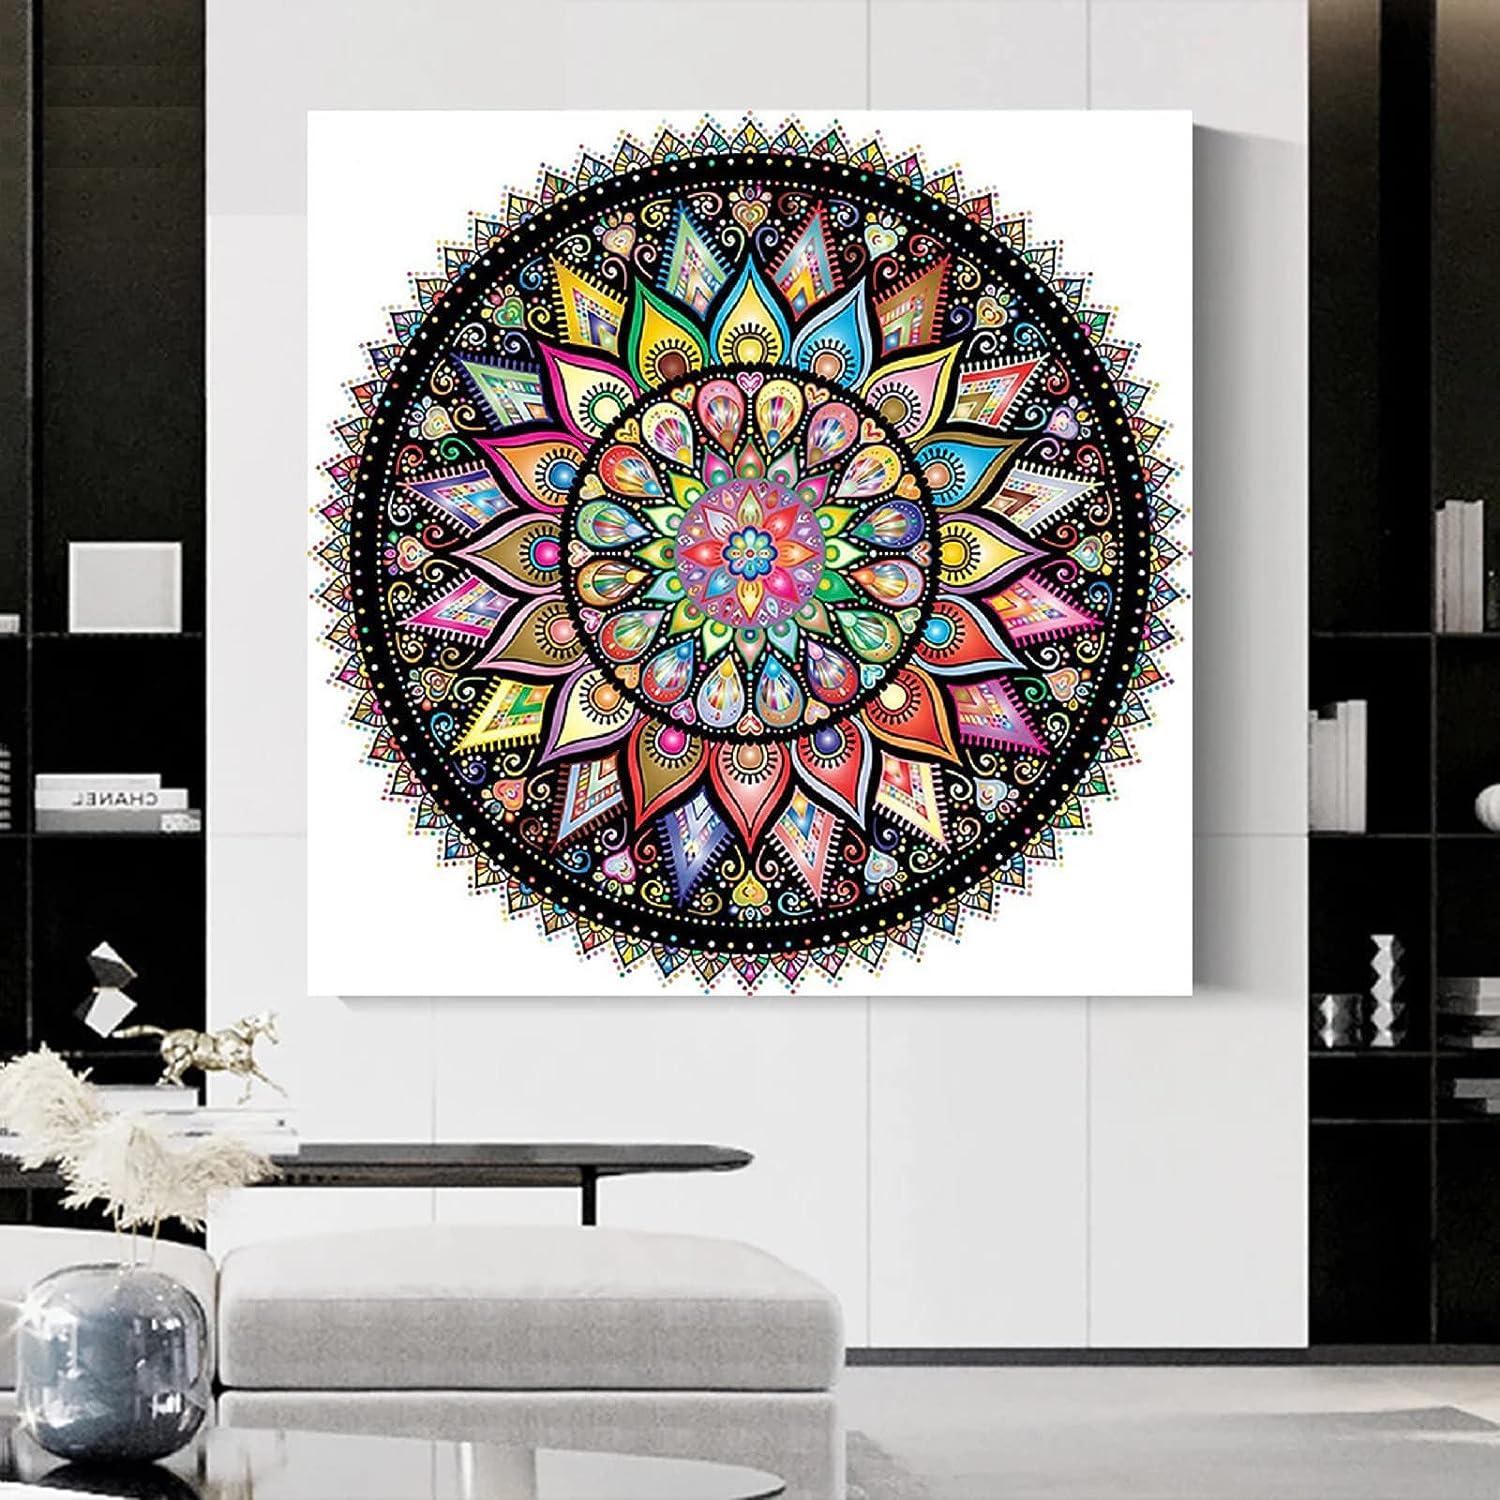 Findvoor Stamped Cross Stitch Kits for Beginners Full Range of Cross  Stitching Embroidery Pattern for Kids or Adults 11CT DIY Needlepoint  Embroidery Starter Kits-Magic Mandala 17.7 17.7 inch